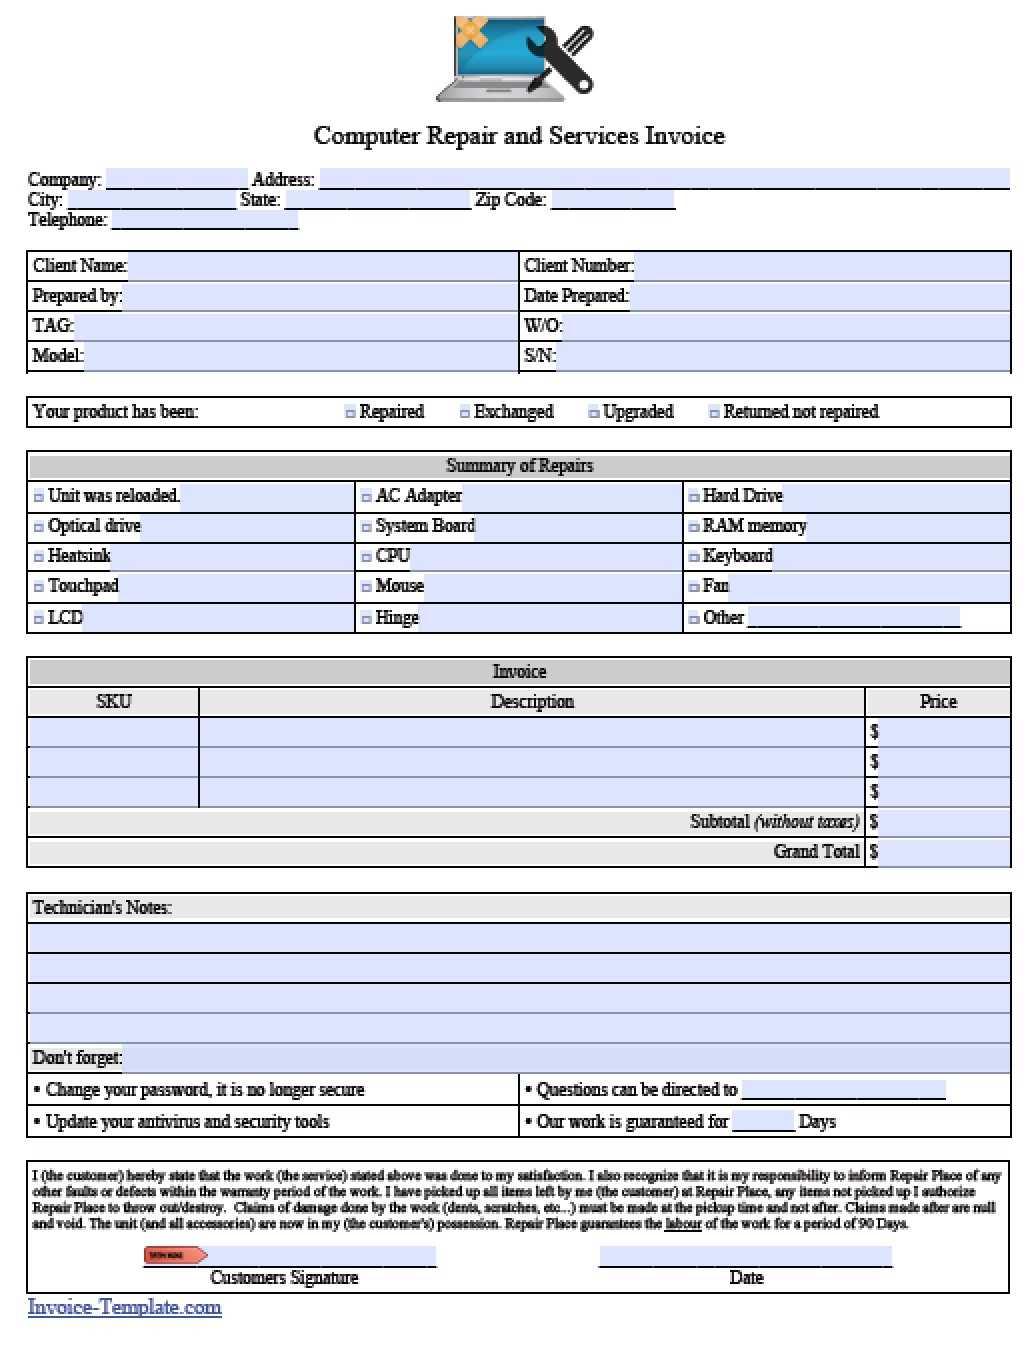 Free Computer Repair Service Invoice Template | Pdf | Word Intended For Computer Maintenance Report Template